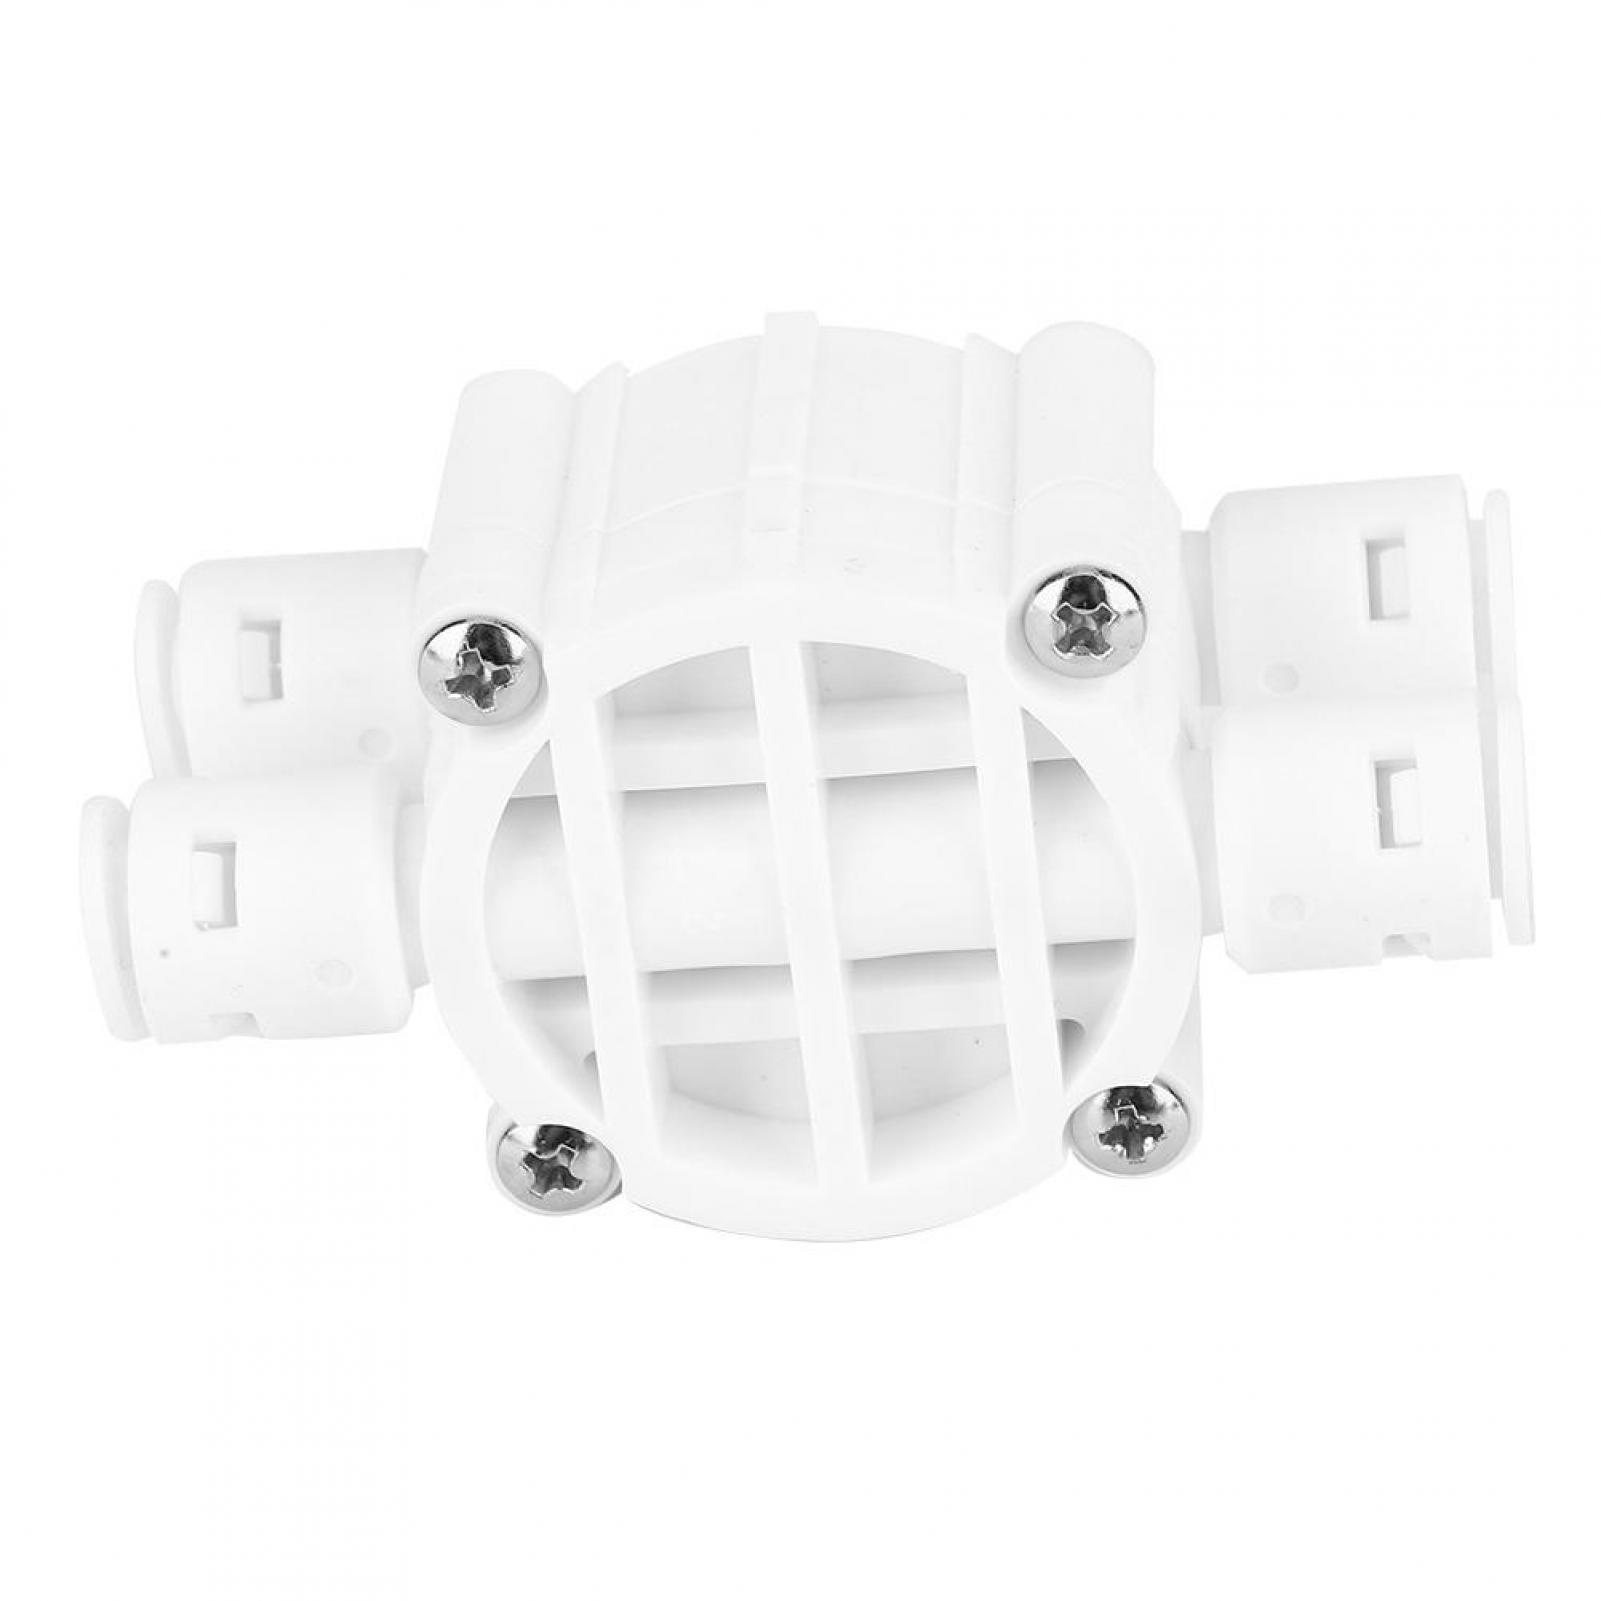 4 Way 1//4 Port Auto Shut Off Valve For RO Reverse Osmosis Water Filter System ^P